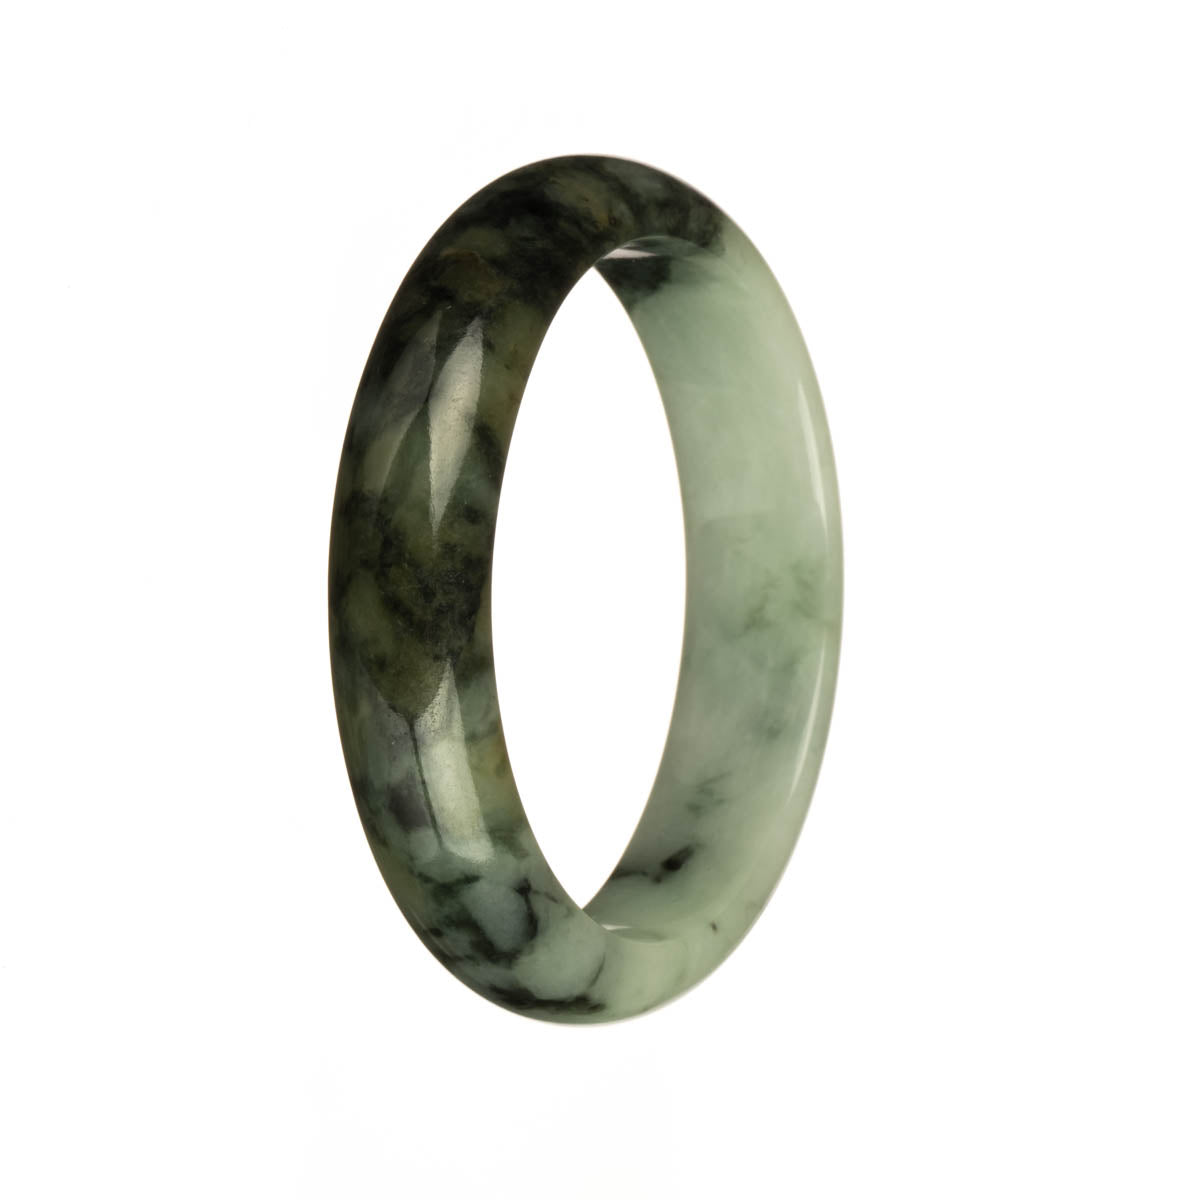 Real Grade A Light Green with Dark Green and Olive Green Patterns Traditional Jade Bangle - 54mm Half Moon